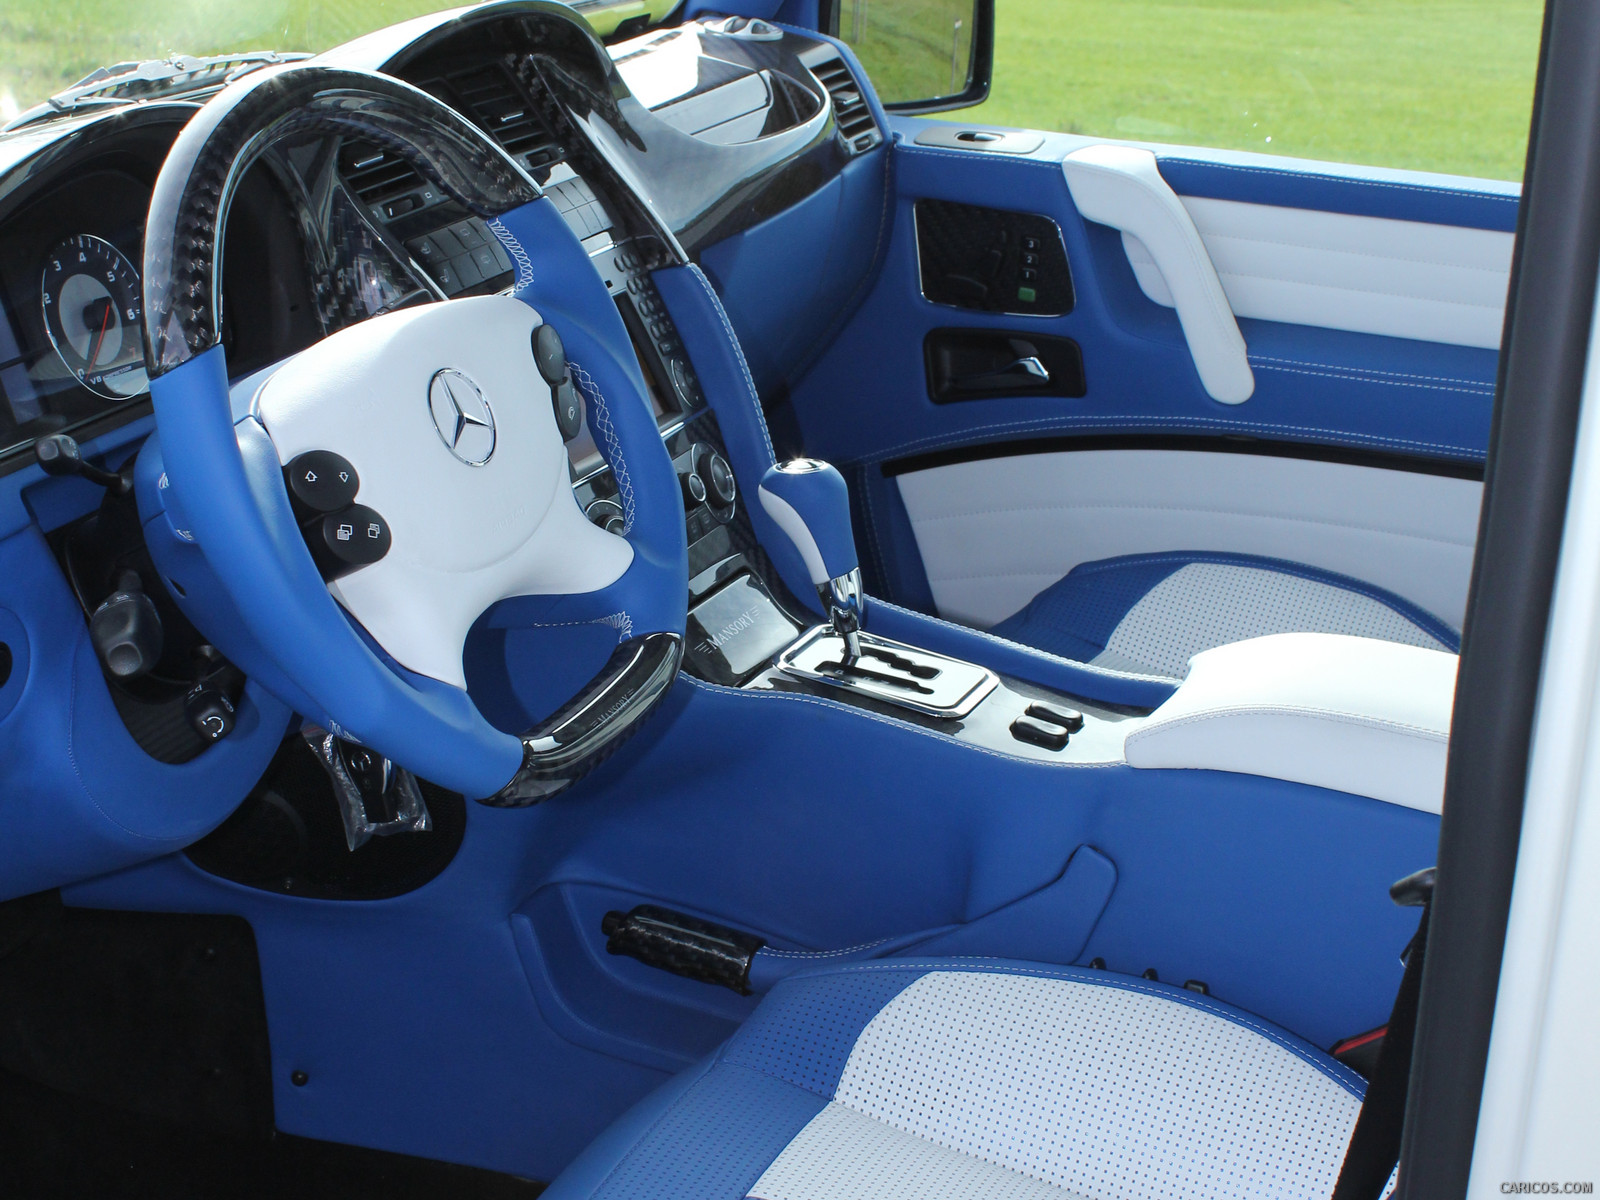 Mansory G-Couture based on Mercedes G-Class  - Interior, #33 of 39